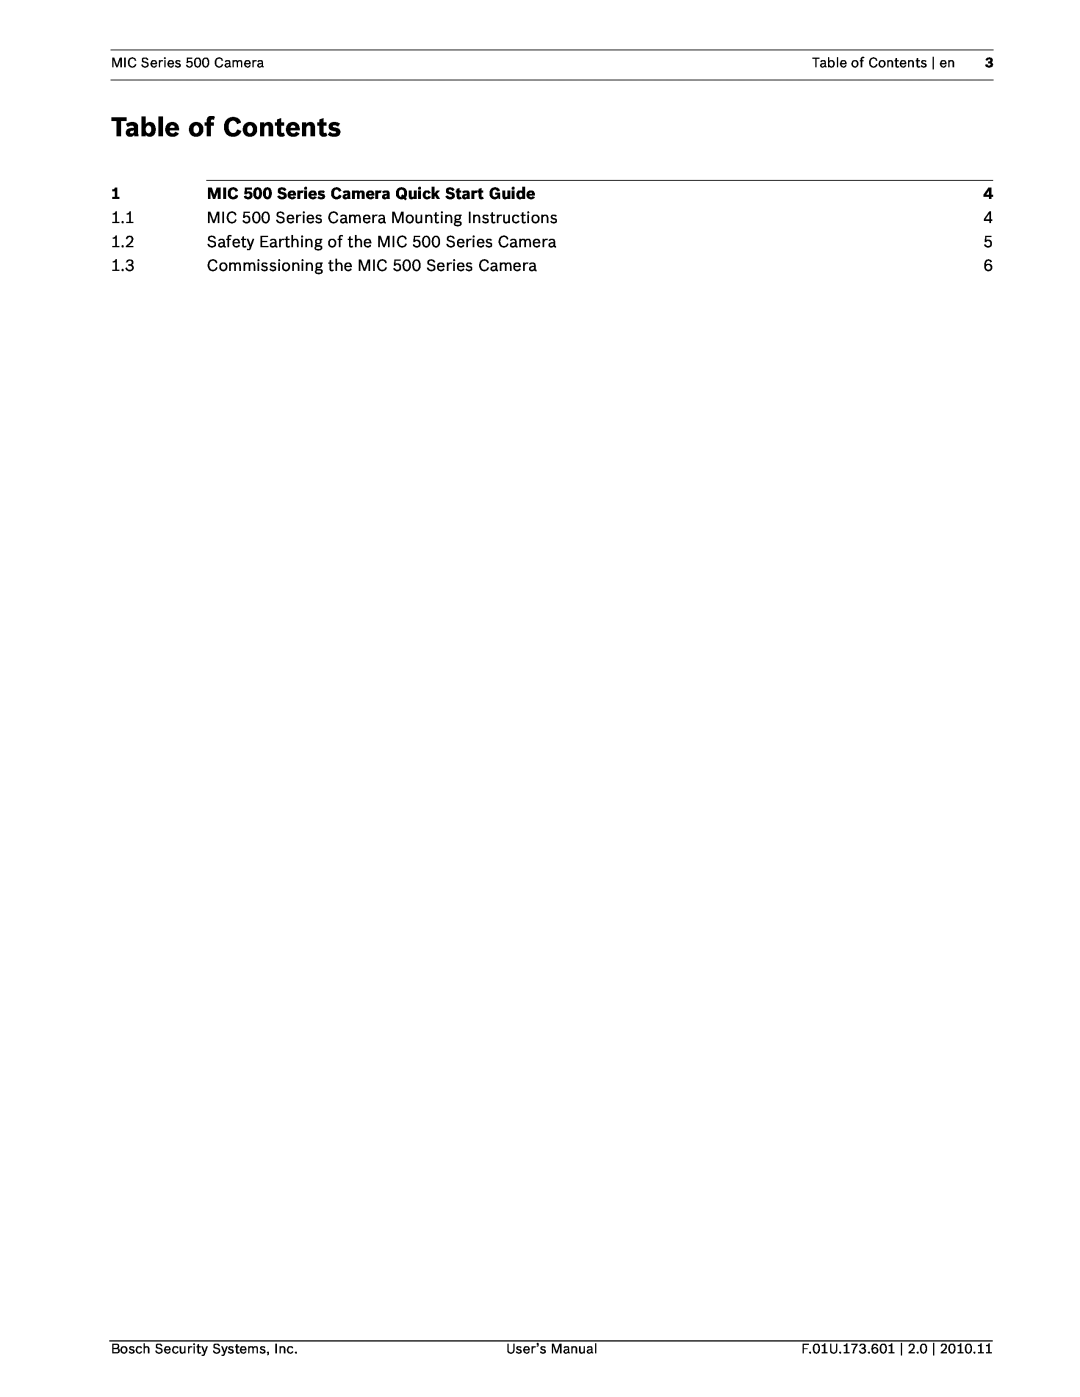 Bosch Appliances manual MIC Series 500 Camera, Table of Contents en, Bosch Security Systems, Inc, F.01U.173.601 